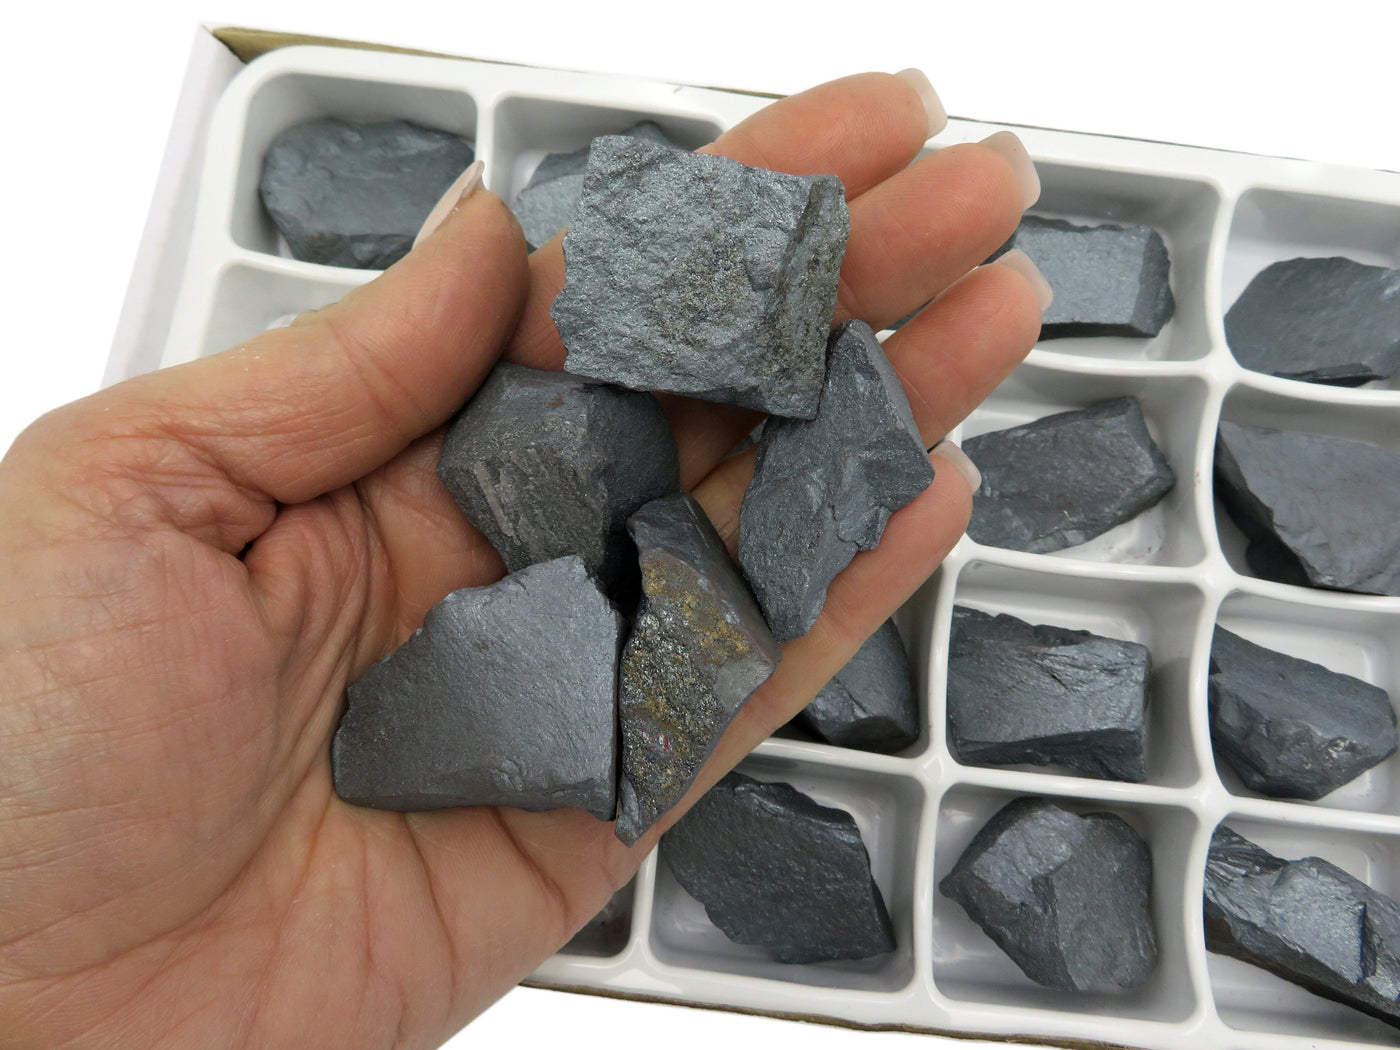 close up of varies chunks of hematite held in hand to show size and texture